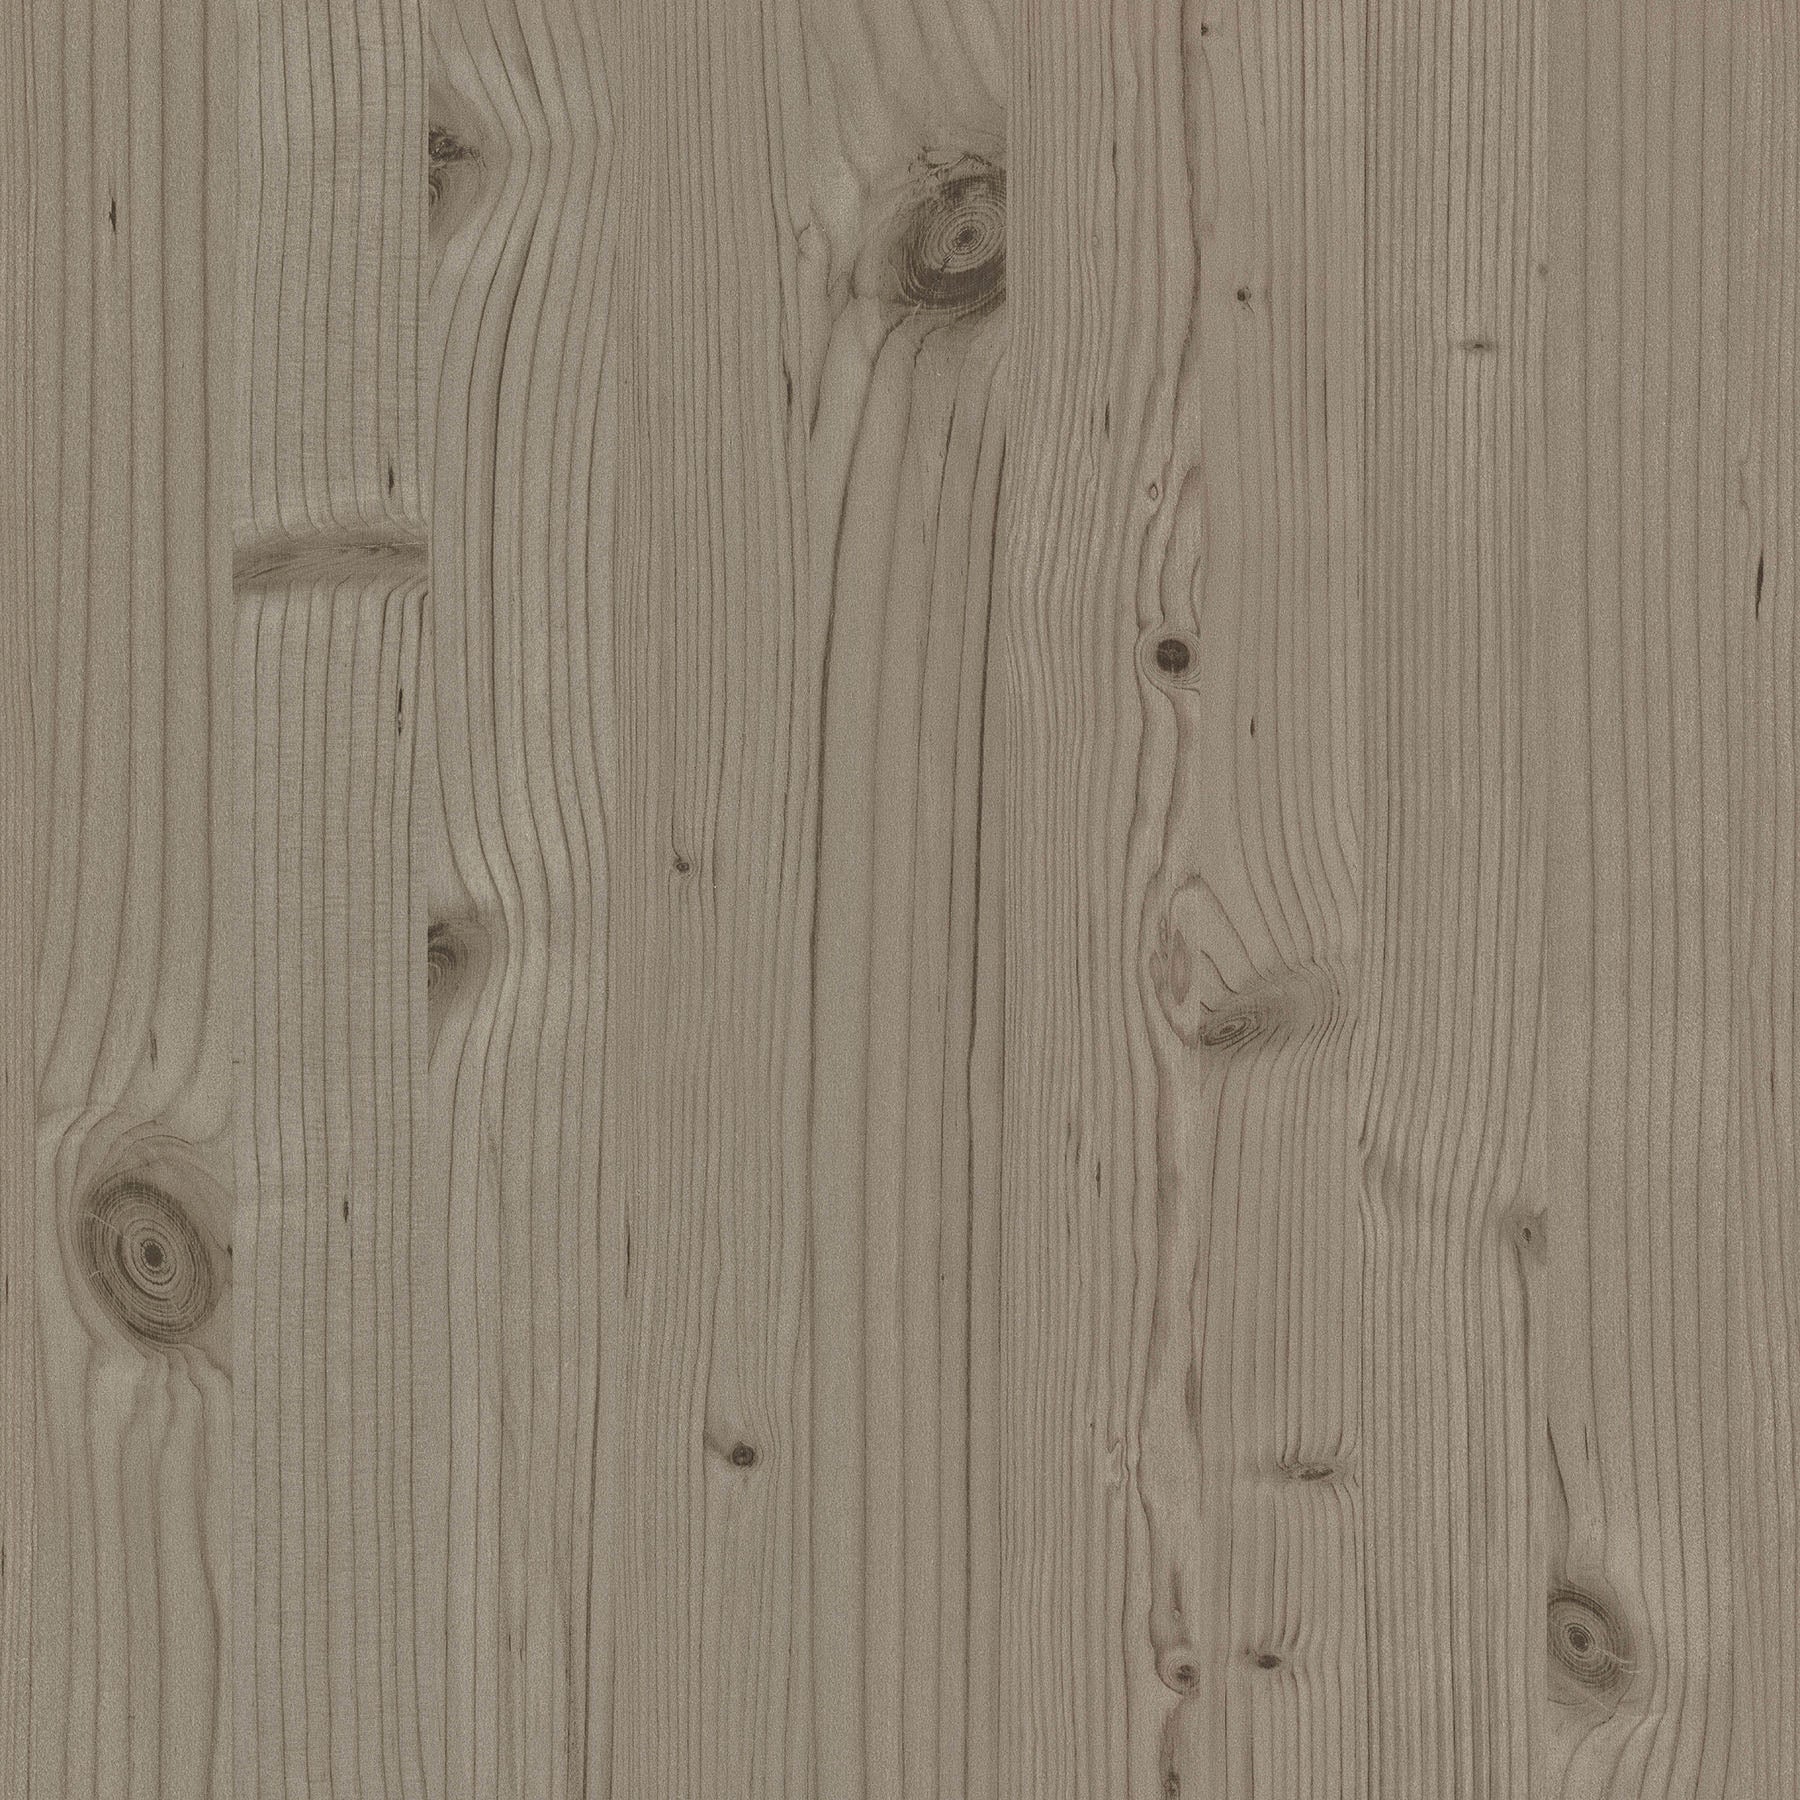 Find 2774-606270 Stones & Woods Neutrals Wood Paneling Wallpaper by Advantage